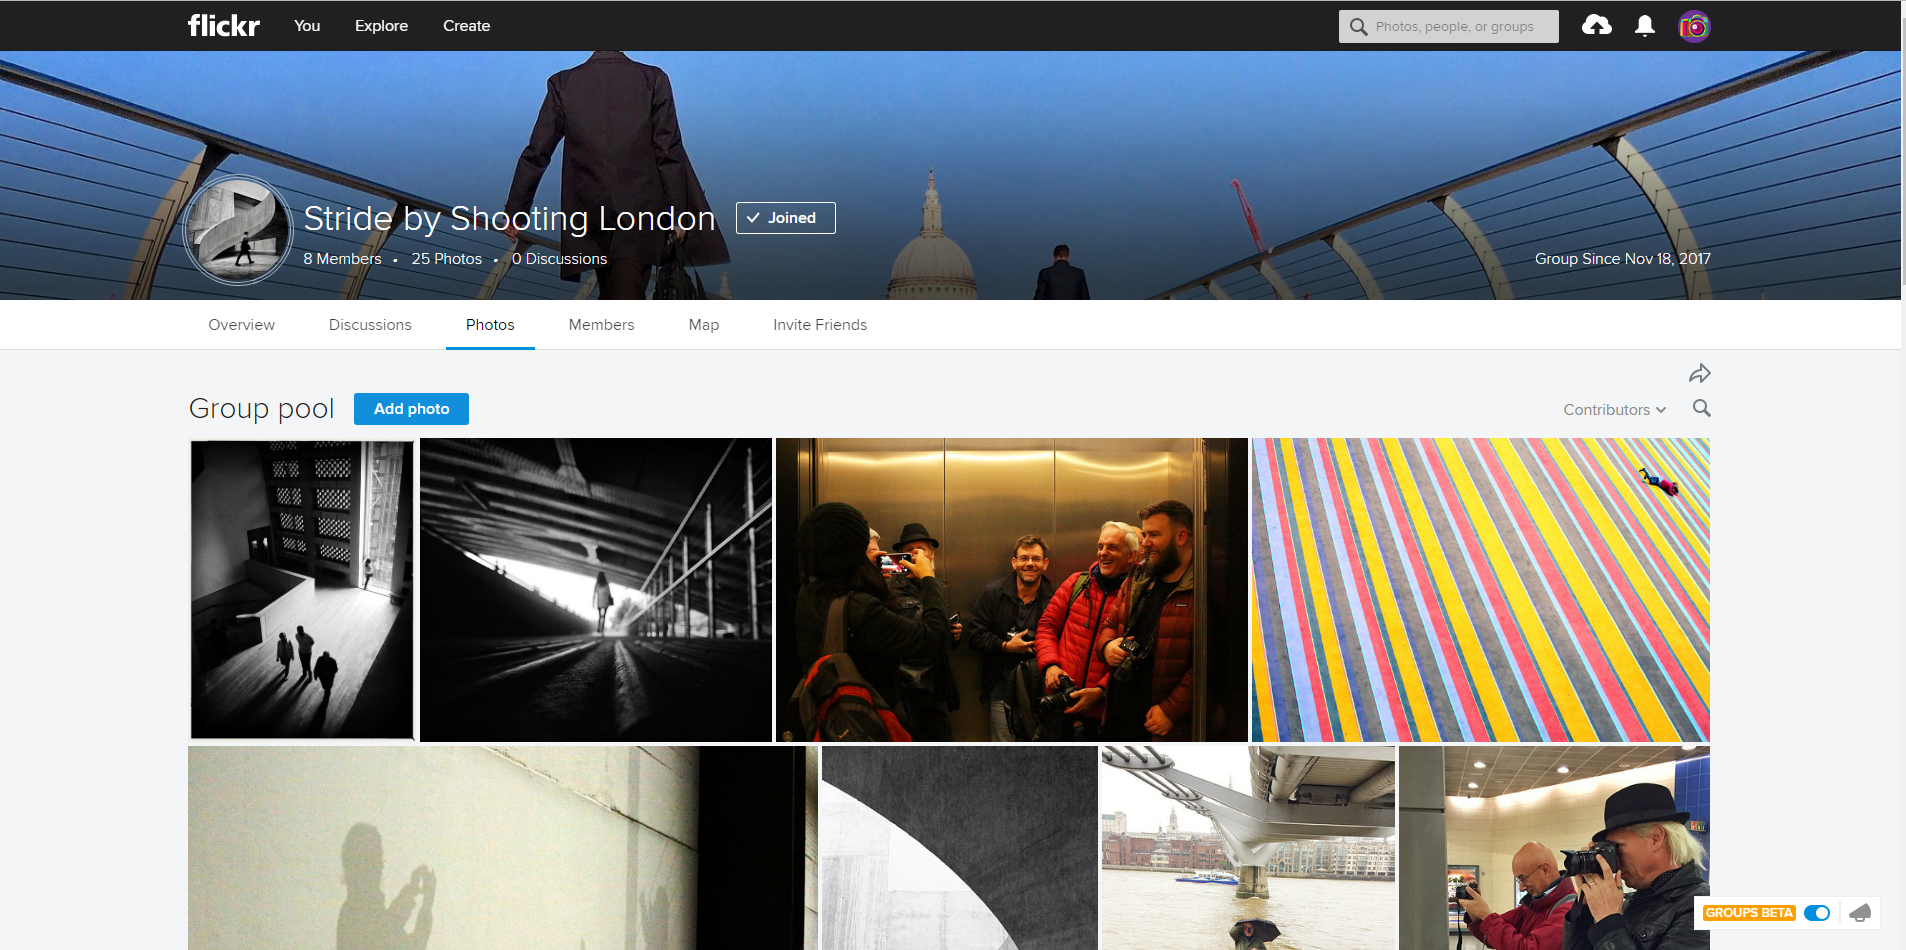 Stride By Photography Flickr Group launched where attendees can showcase their photos